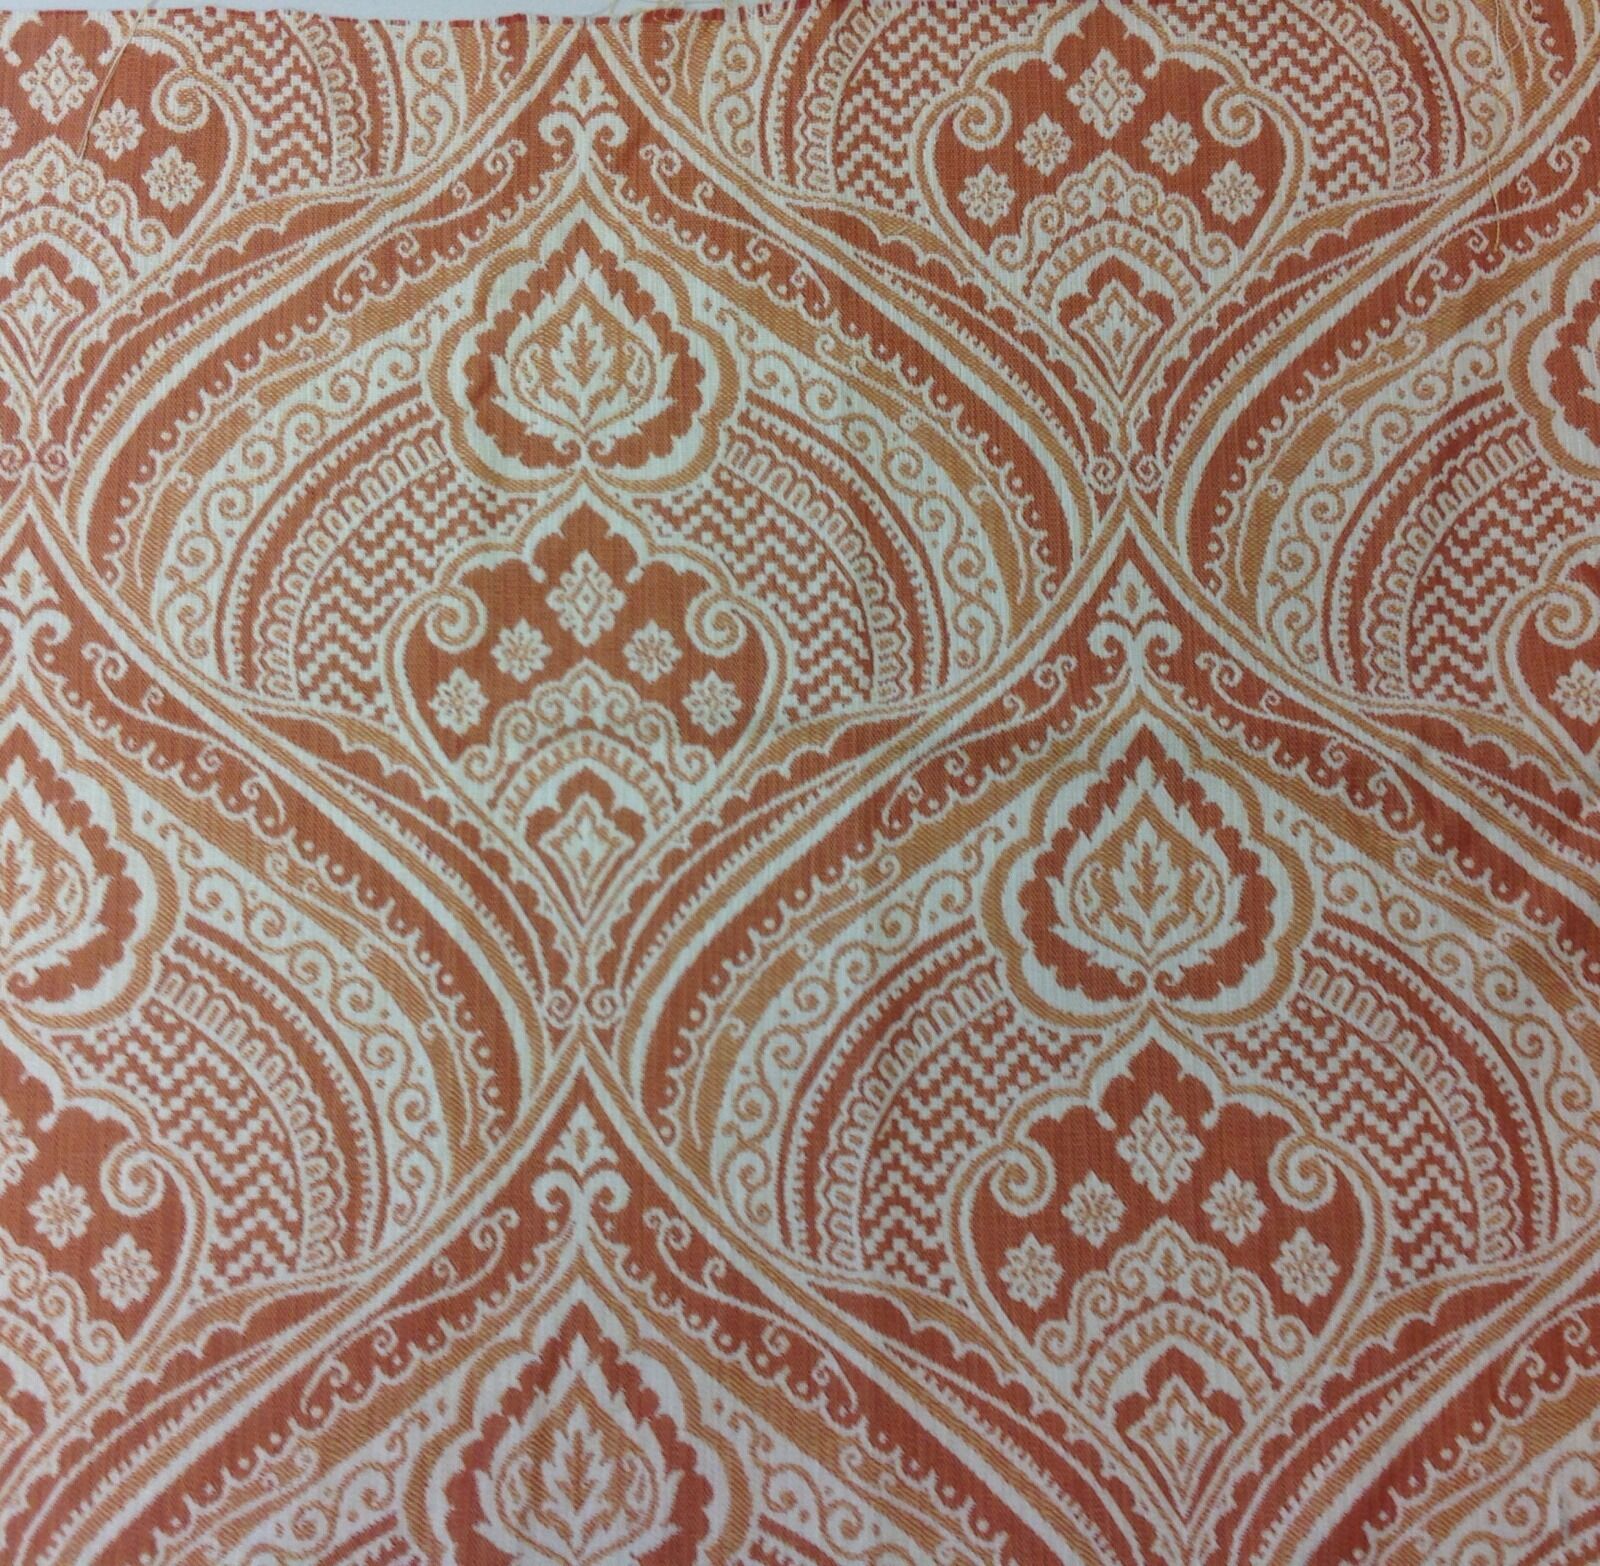 OUTDURA OUTDOOR ORANGE DAMASK UPHOLSTERY FABRIC- Sultan/Apricot BY THE YARD 8351